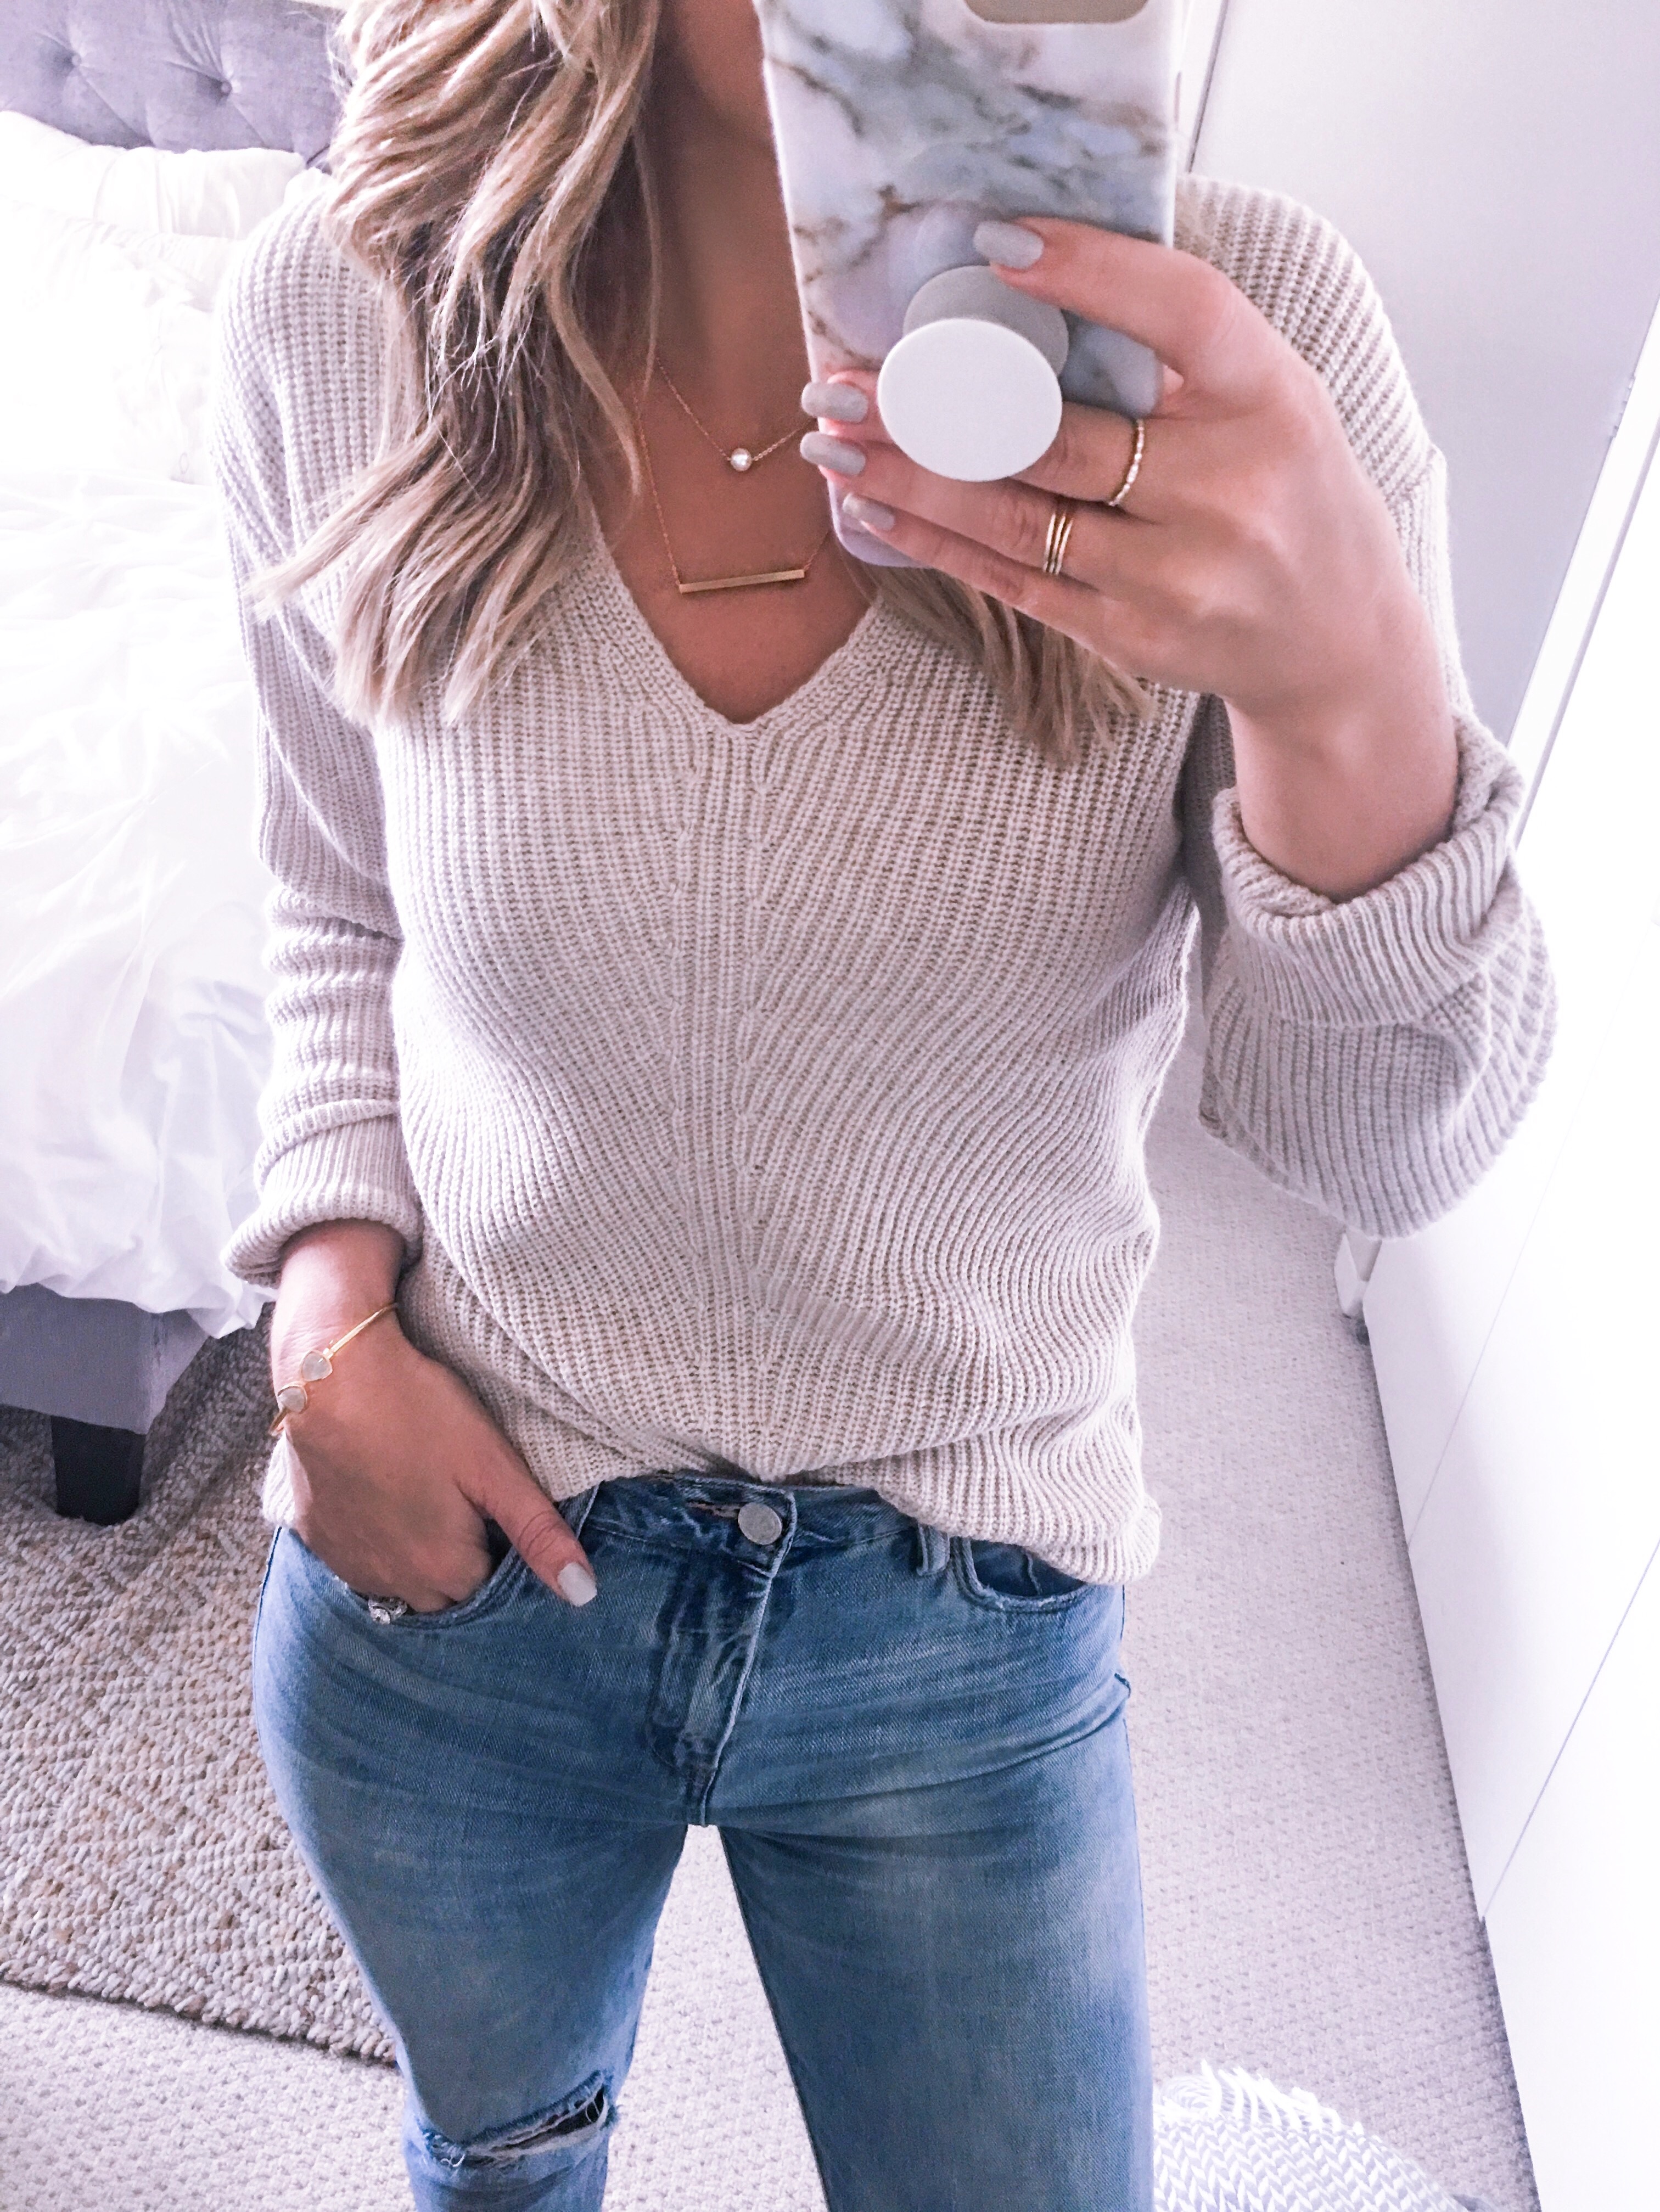 best brown v-neck sweater - January Instagram Fashion Roundup (15 Outfits) by popular Chicago fashion blogger Visions of Vogue